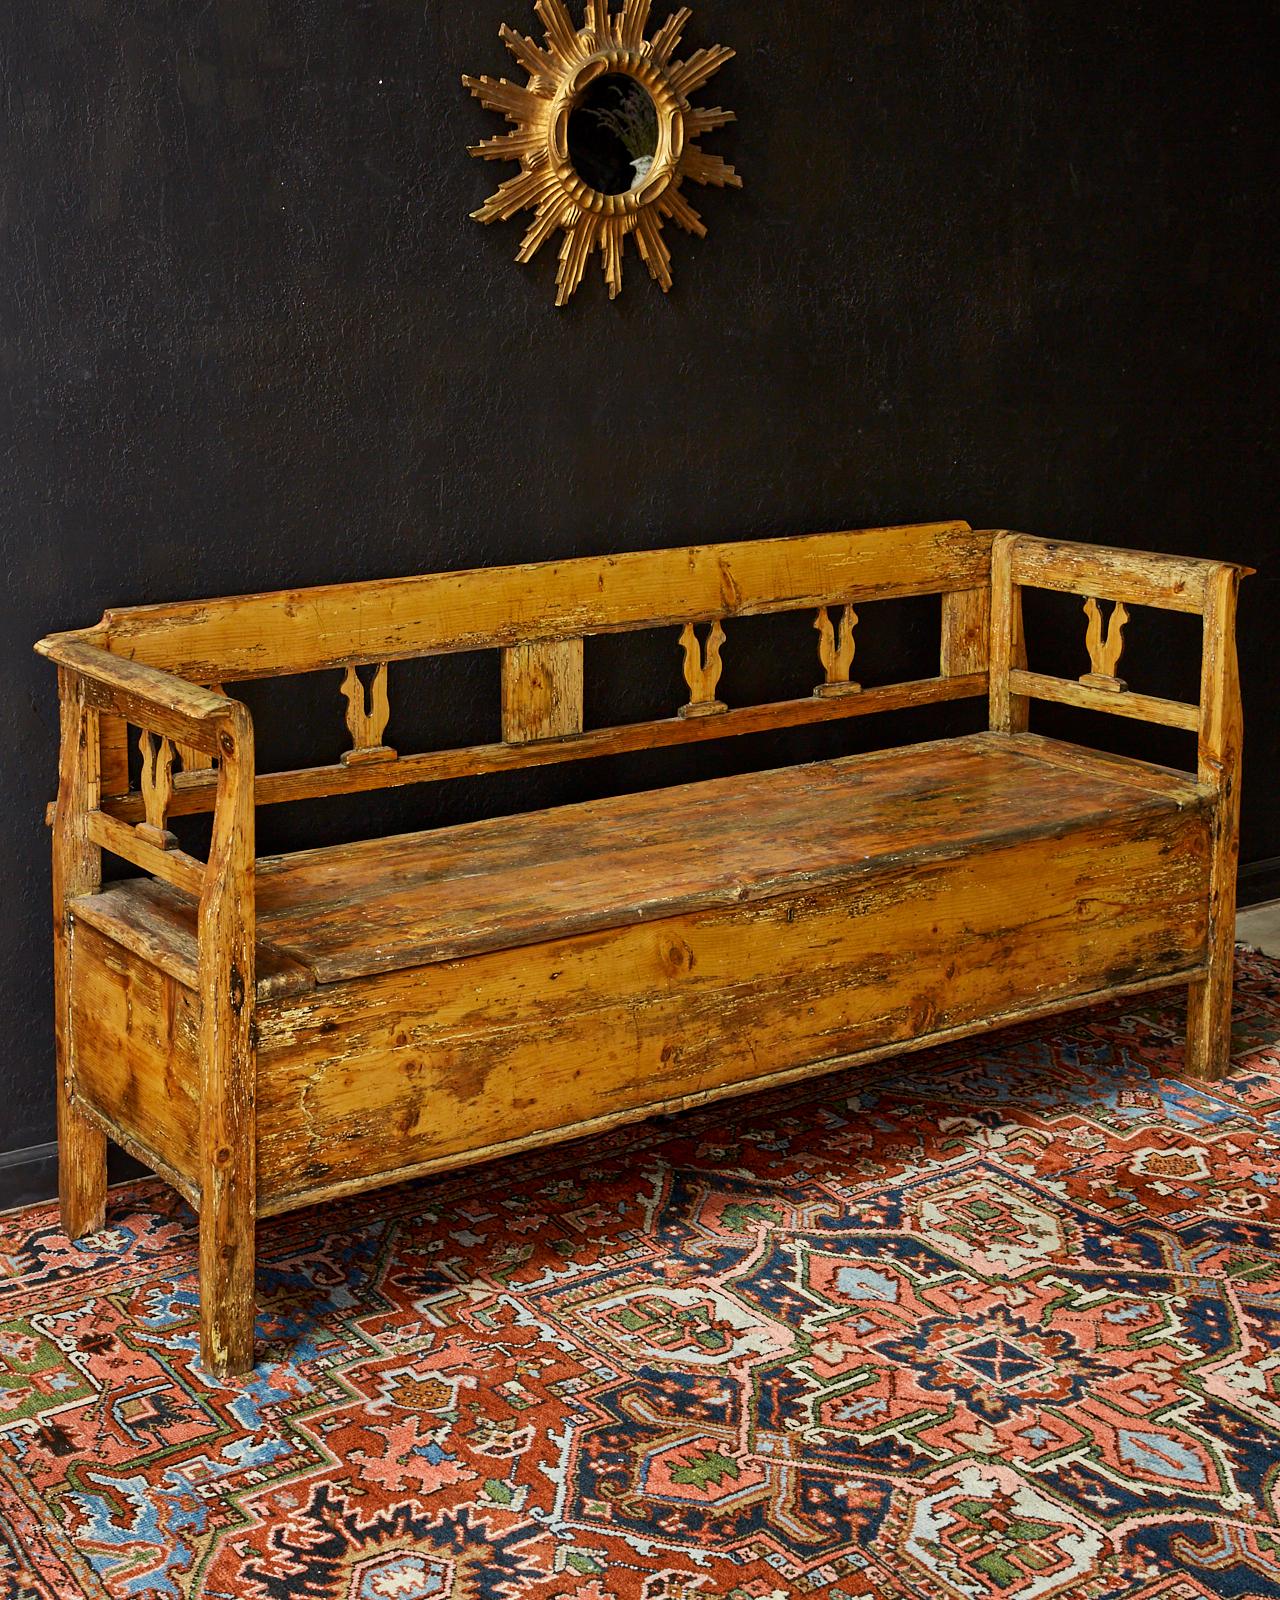 Rustic 19th century Swedish pine bench with a large storage drawer. Features a beautiful warm pine with a distressed, weathered, and worn finish. The back splat and sides are decorated with subtle rooster images. The storage box has original iron